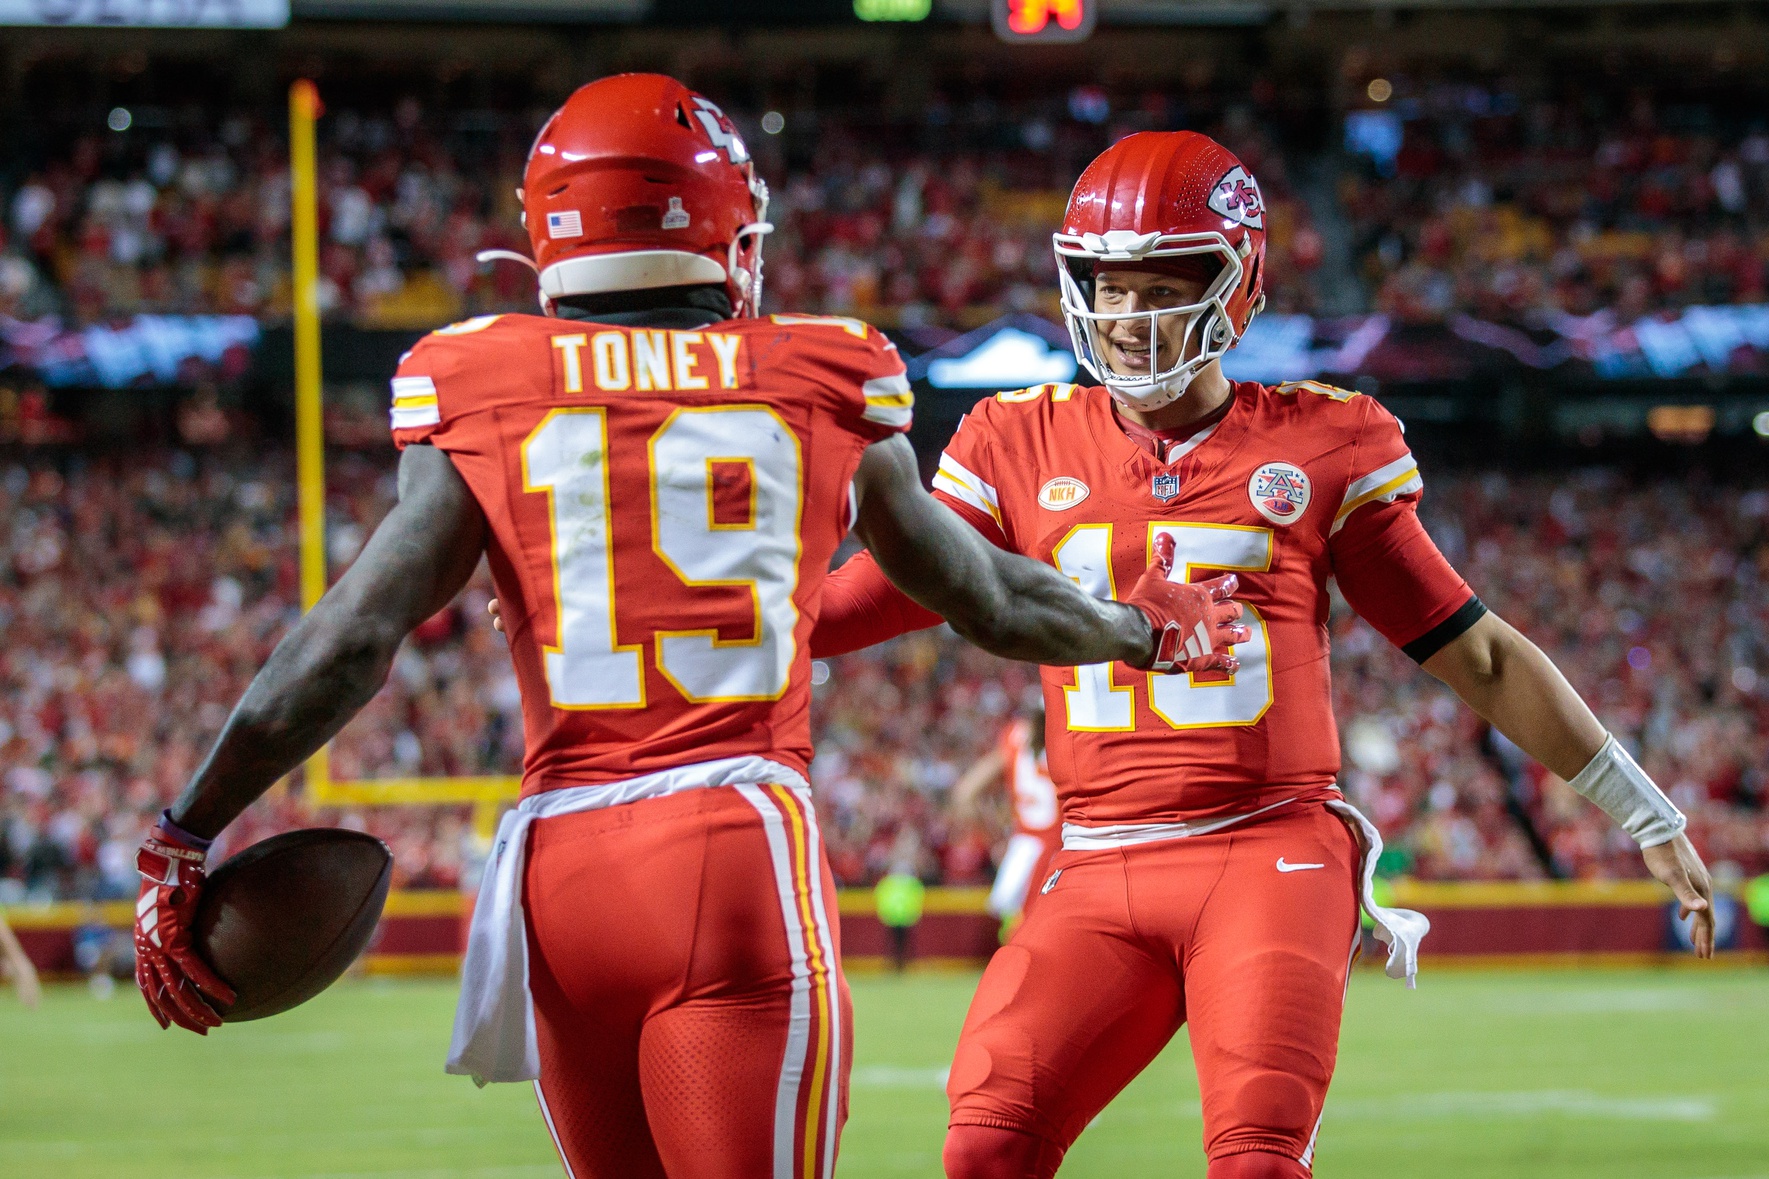 Patrick Mahomes (15) and Kansas City Chiefs wide receiver Kadarius Toney (19) celebrate after a touch down during the second quarter against the Denver Broncos at GEHA Field at Arrowhead Stadium.